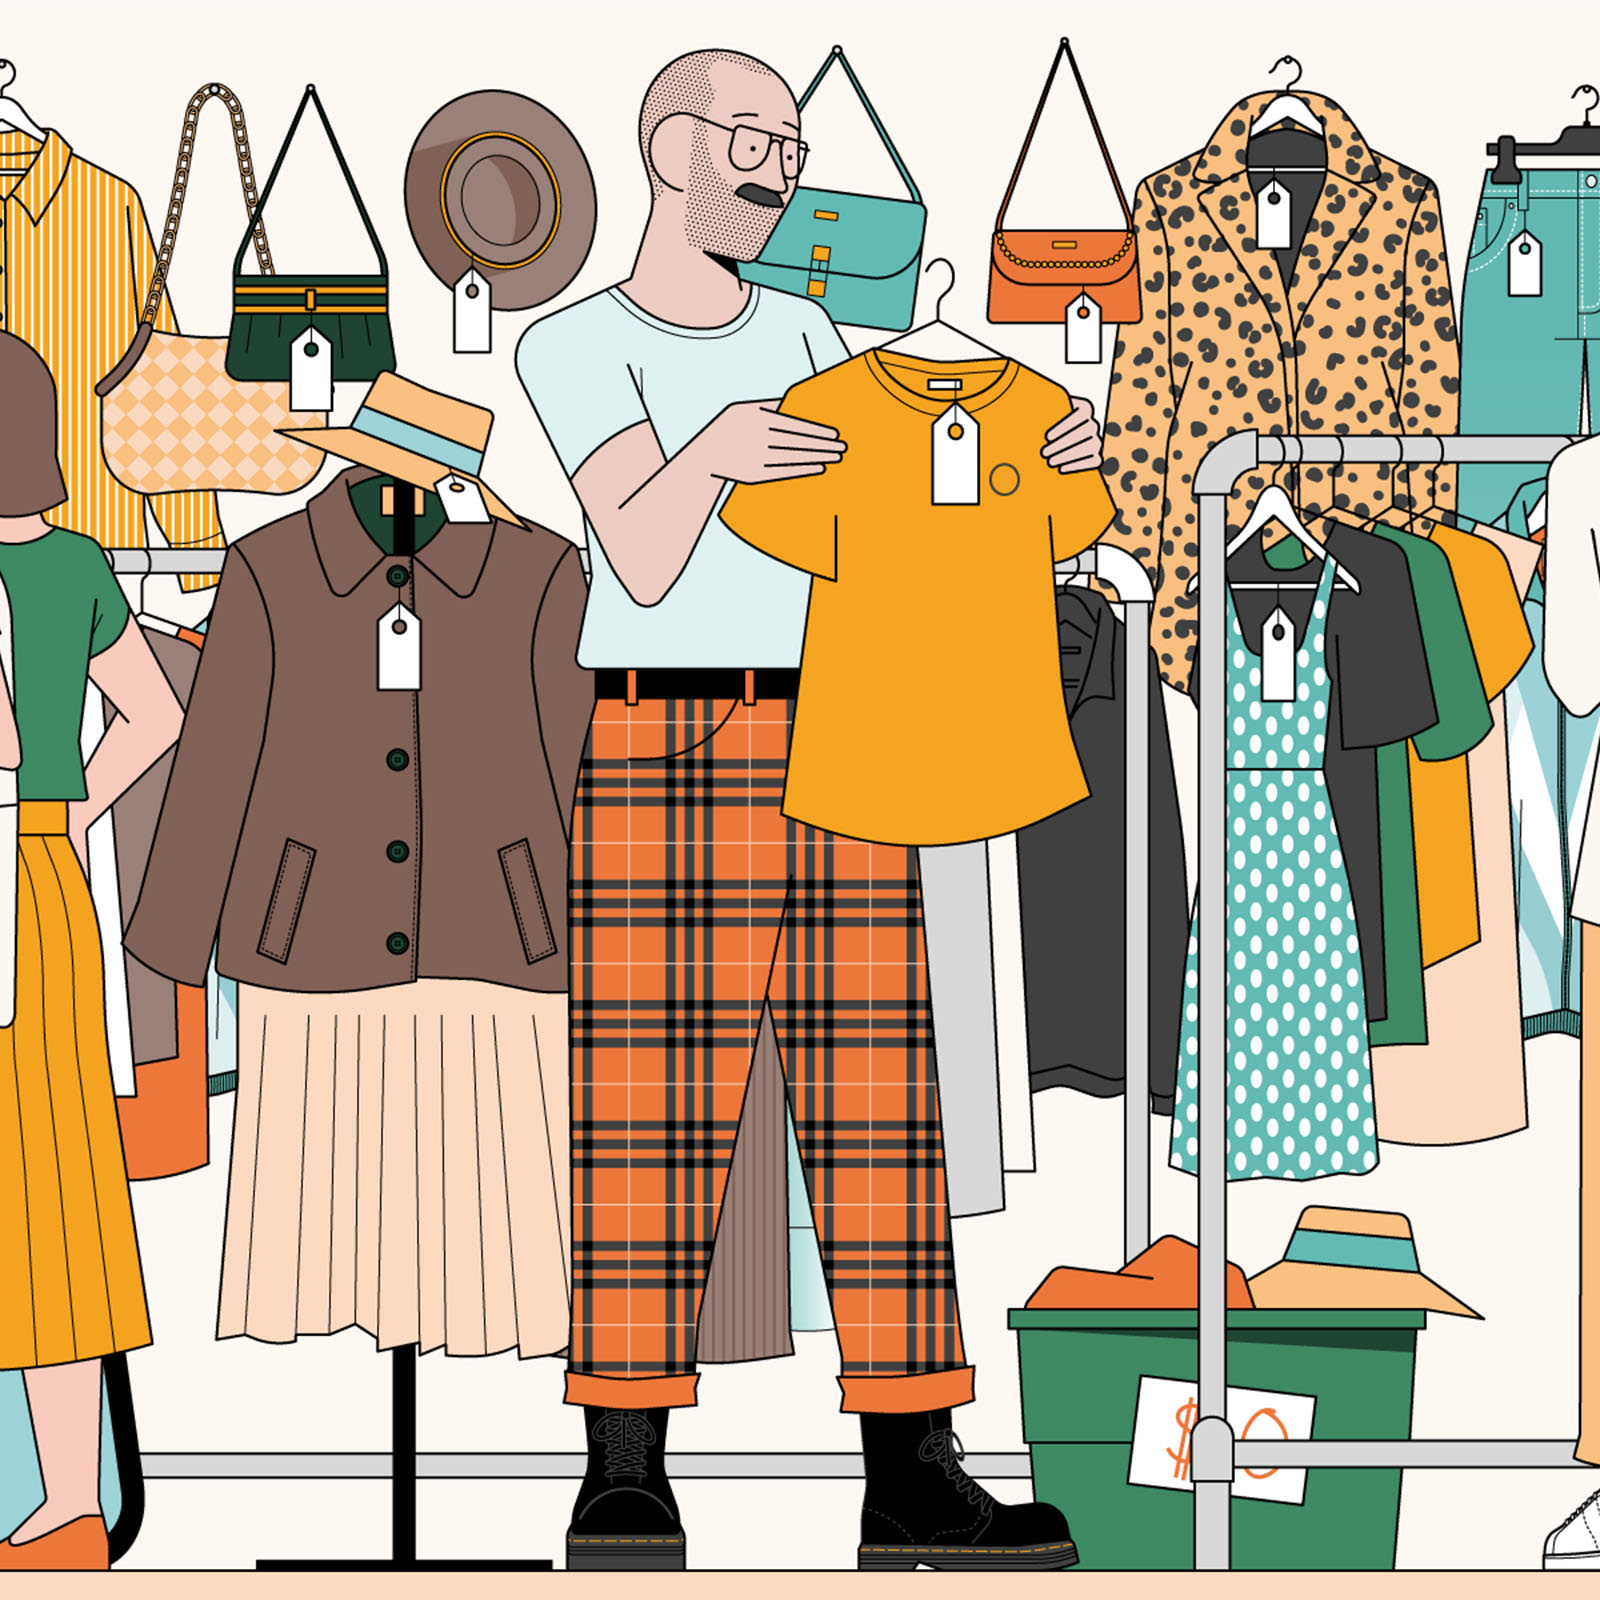 What's next for secondhand shopping?